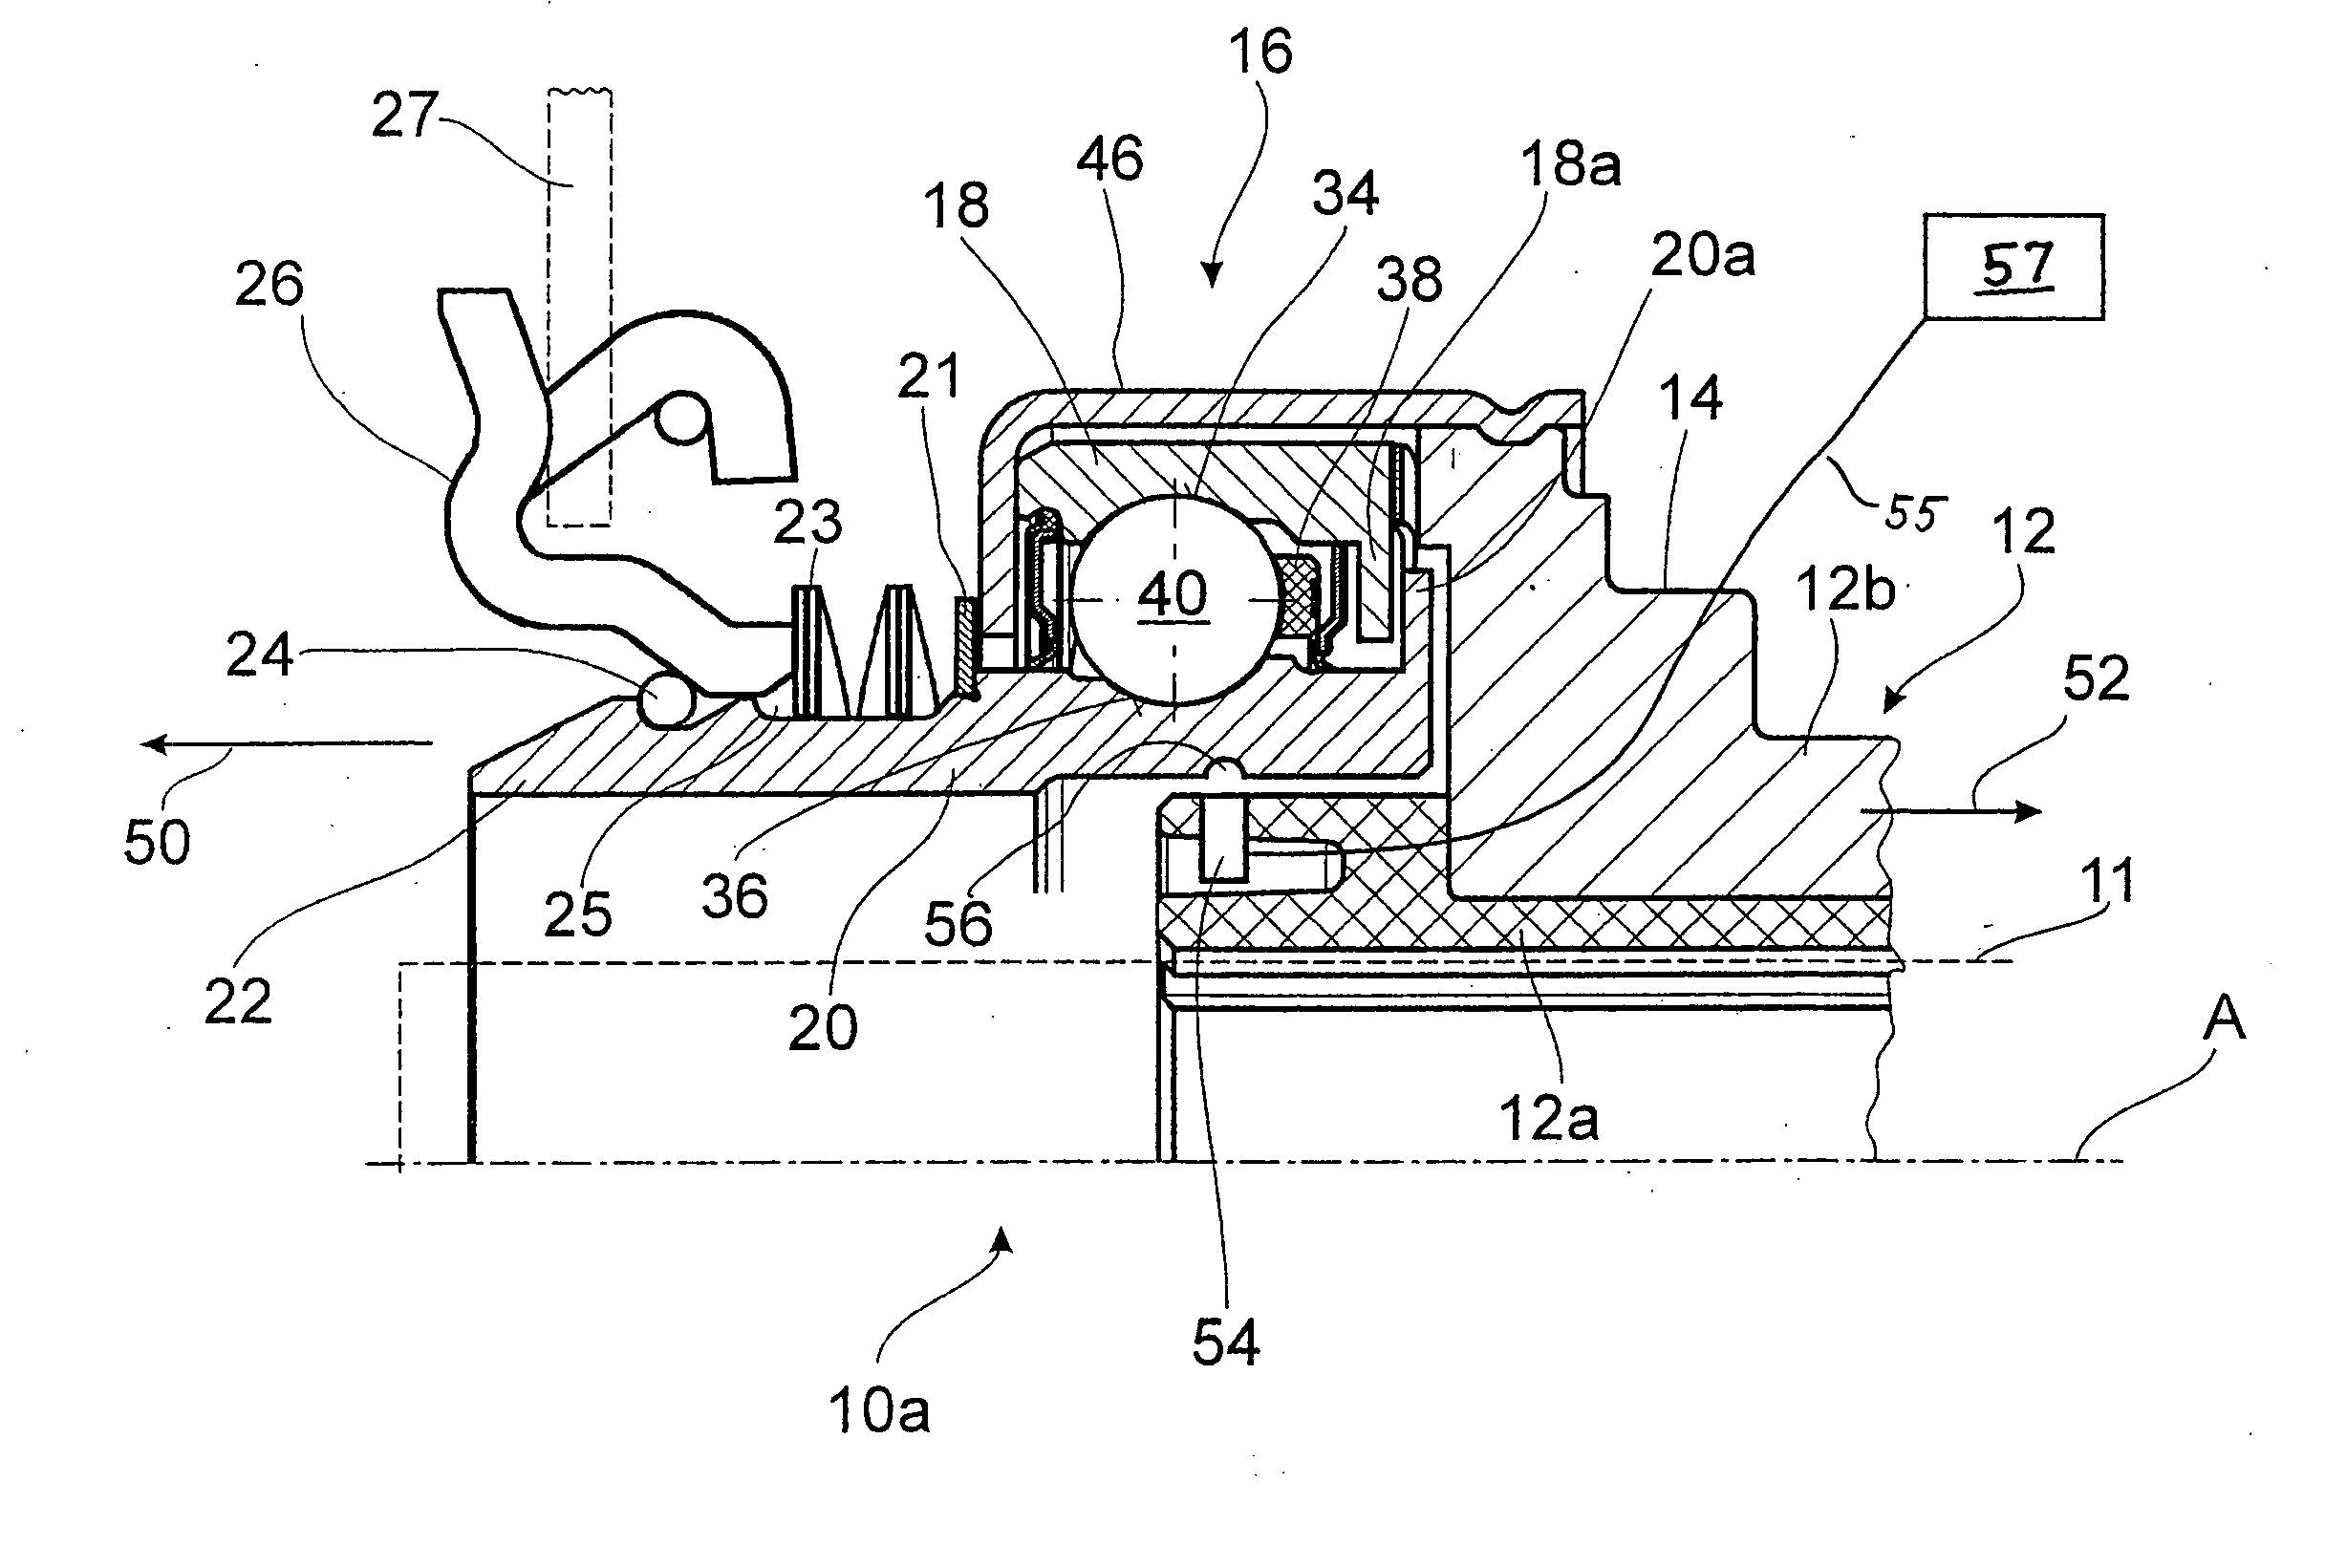 Clutch release device for a friction clutch of a motor vehicle with a fail-safe system